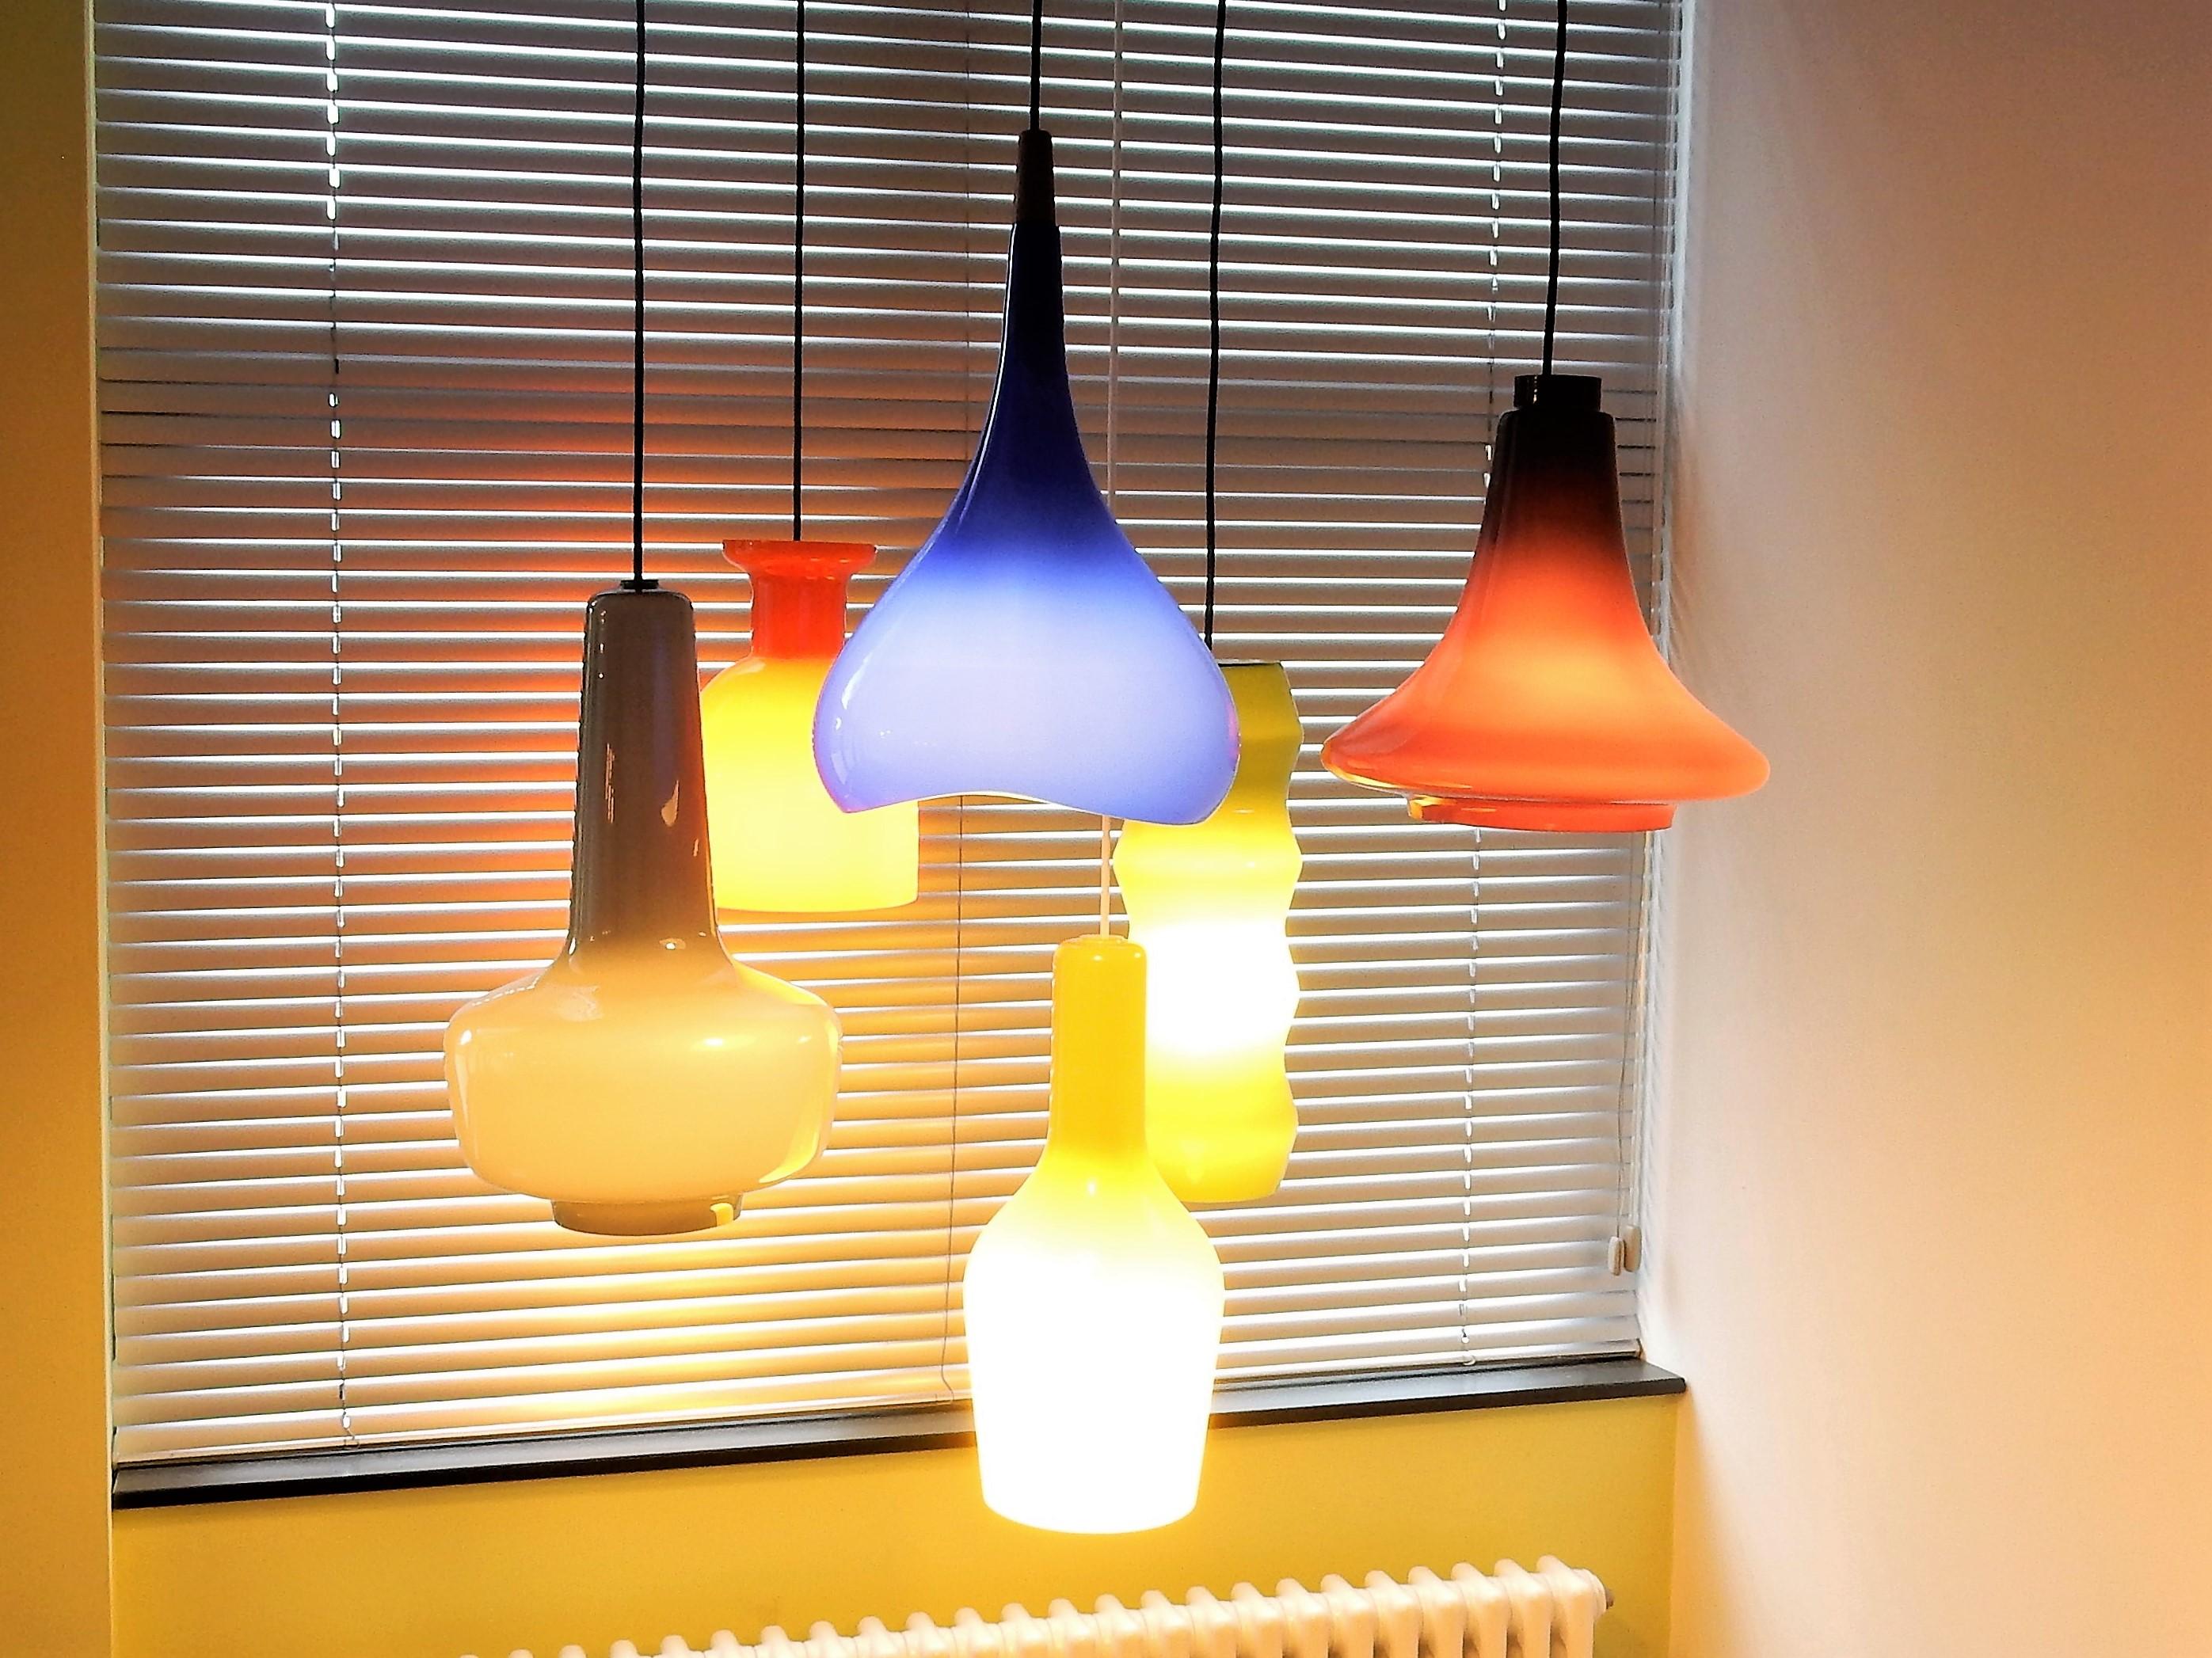 European Selection of 6 Different Colored and Shaped Glass Pendant Lamps, Europe, 1960s